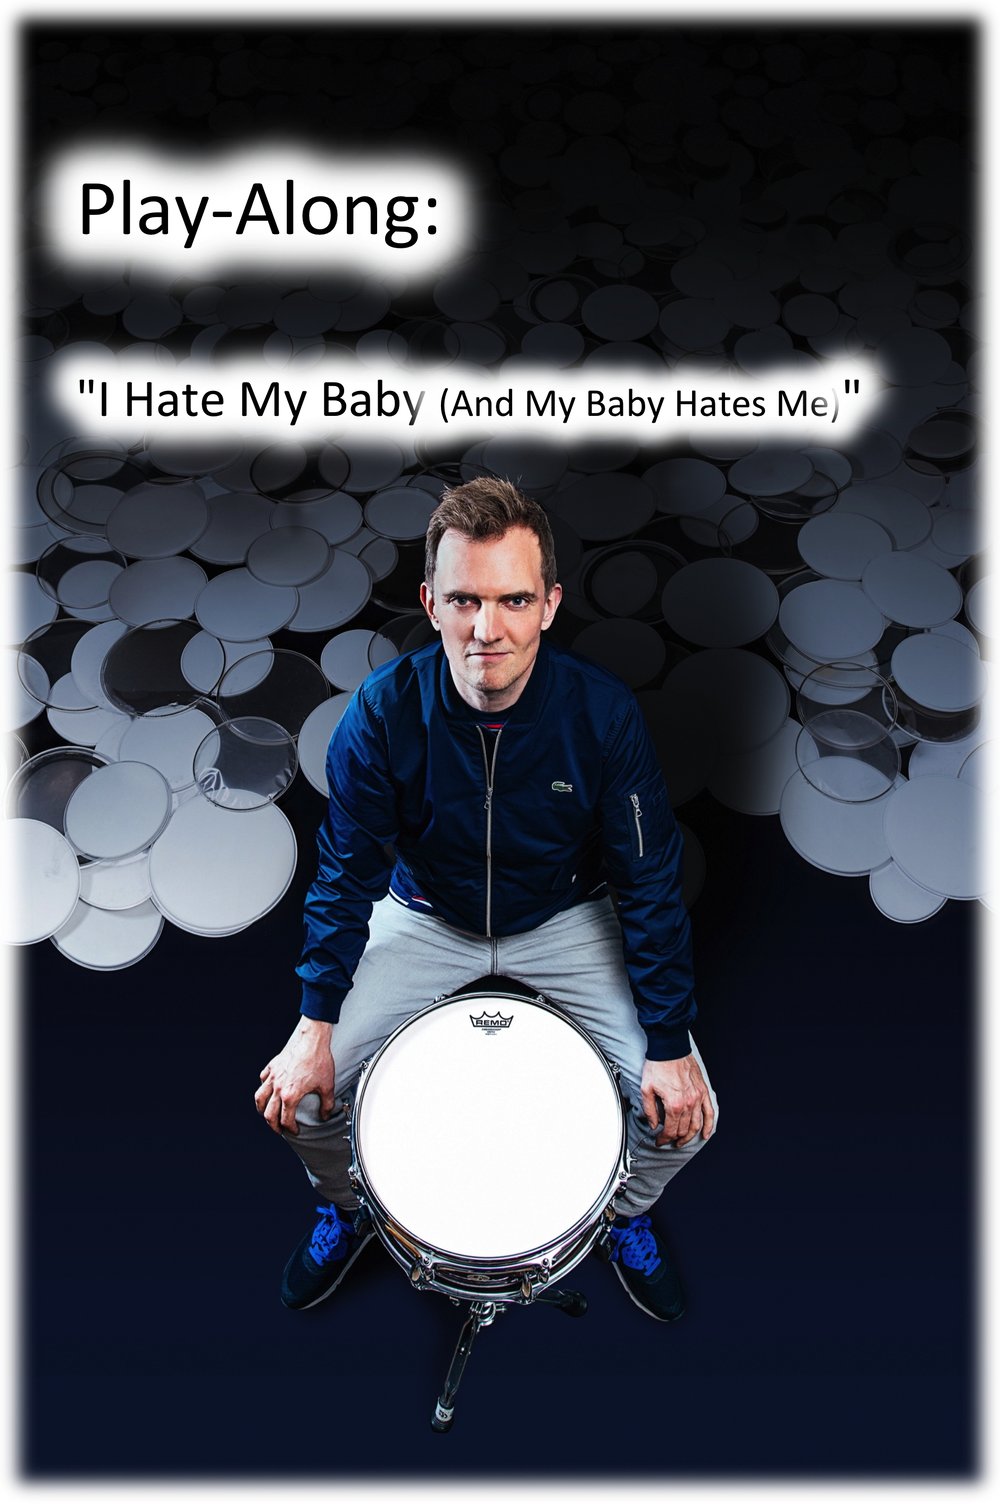 Image of Play-Along: "I Hate My Baby (And My Baby Hates Me)"